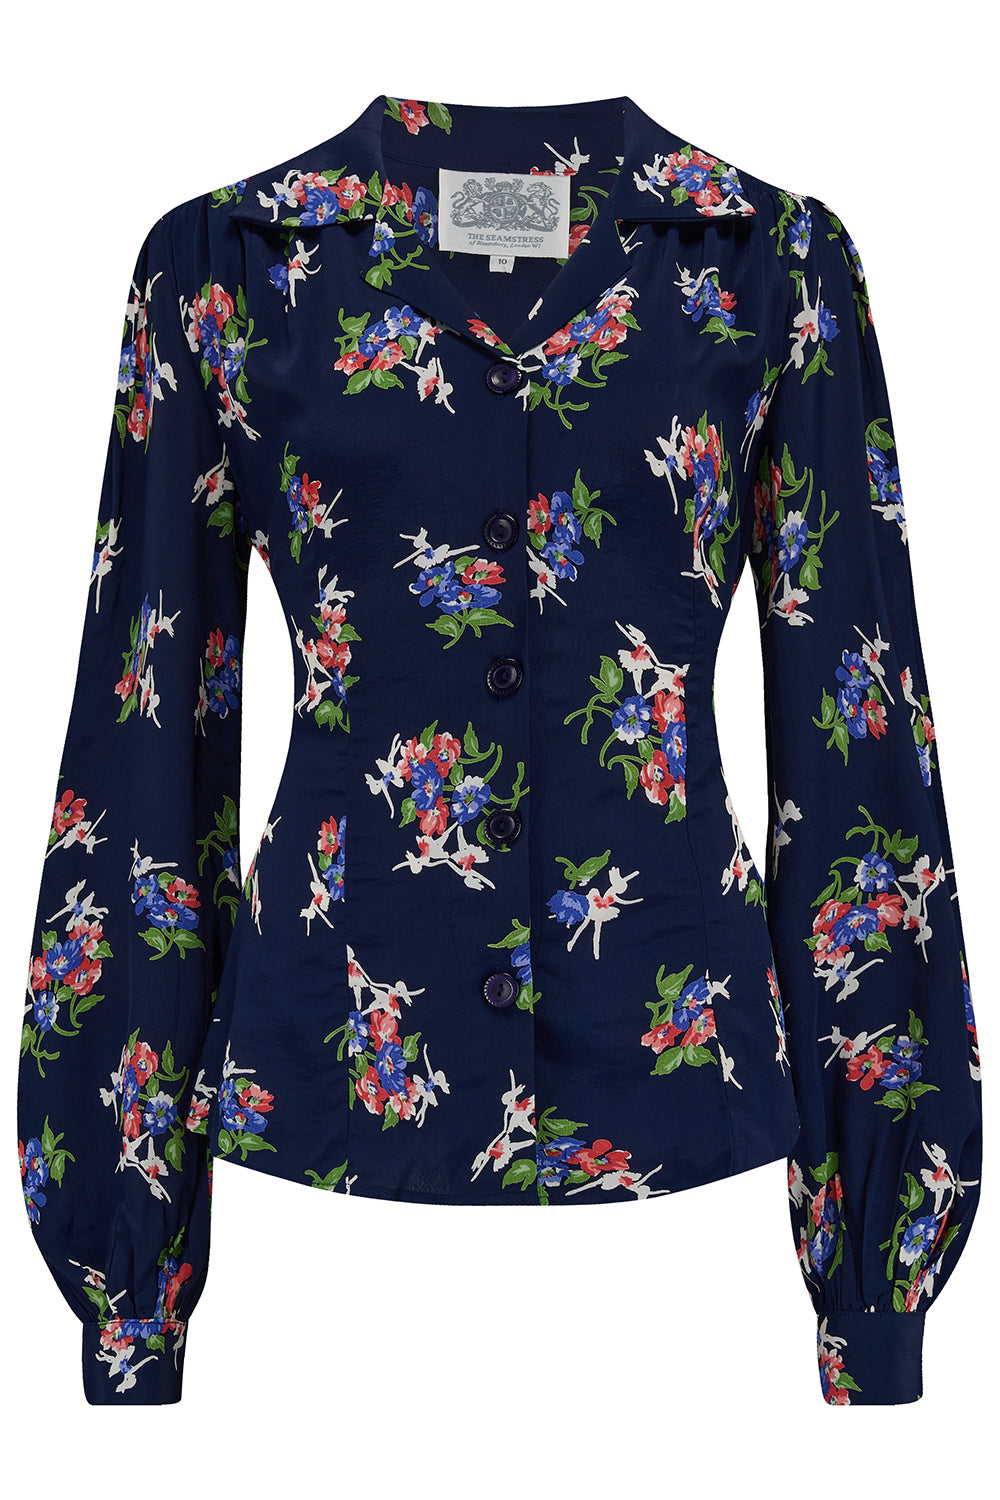 Poppy Long Sleeve Blouse in Navy Floral Dancer, Authentic & Classic 1940s Vintage Style